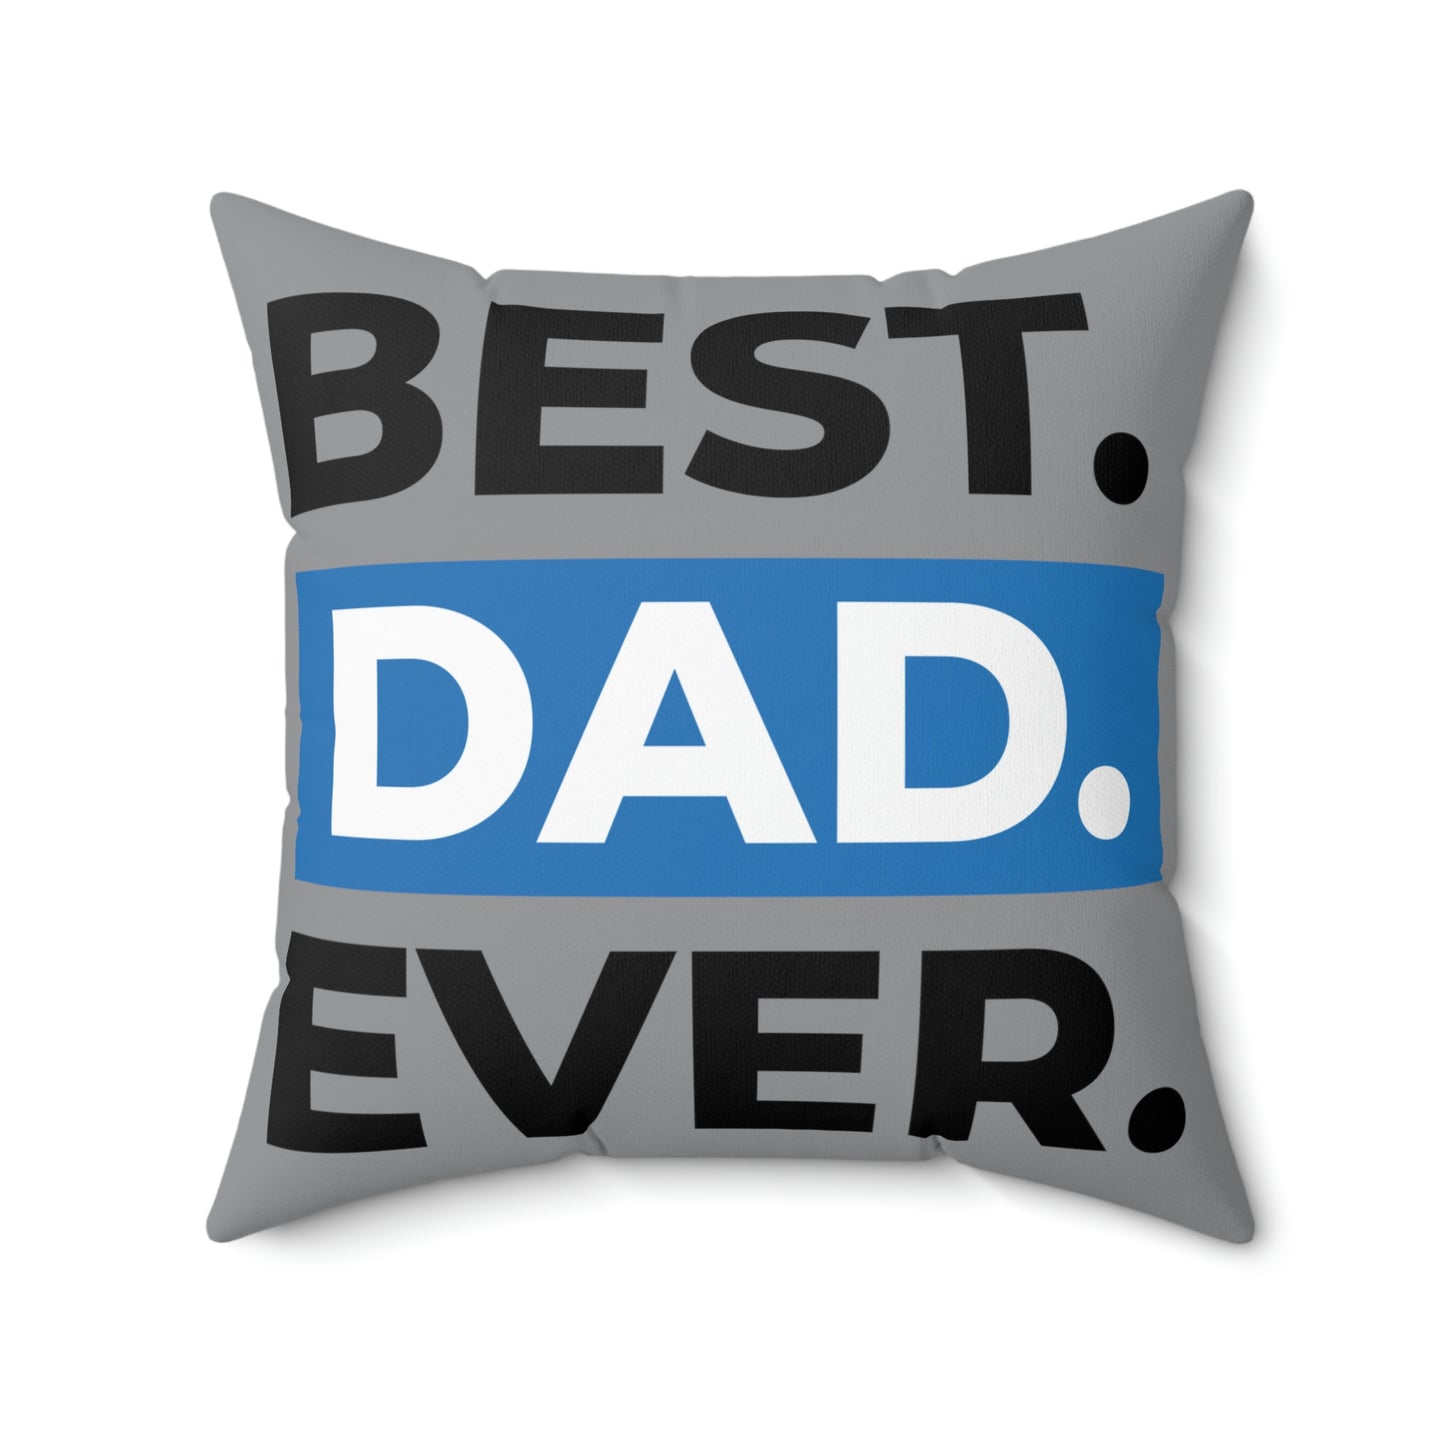 Spun Polyester Square Pillow Case "Best Dad Ever on Gray”